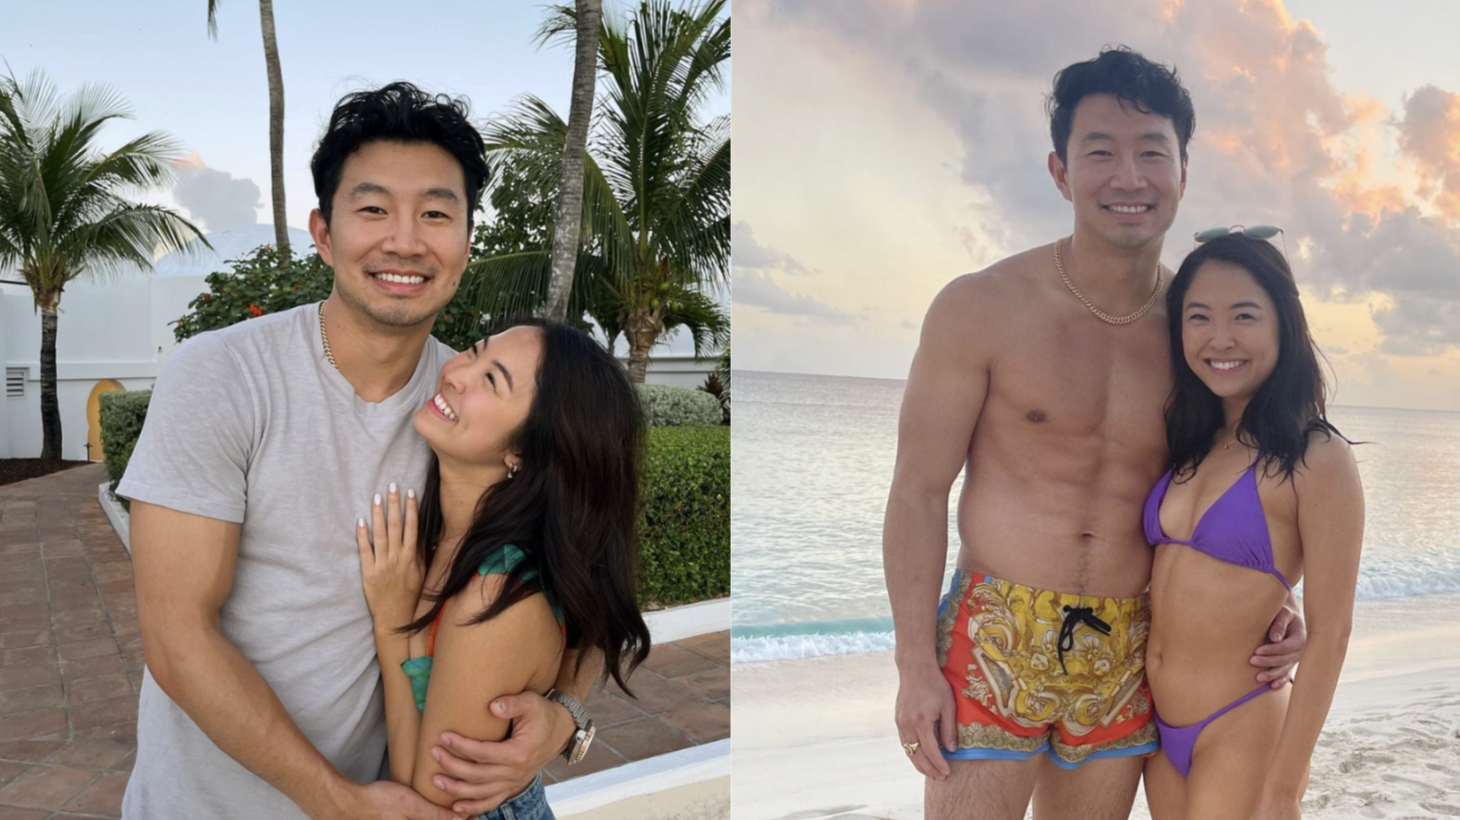 Simu Liu's Girlfriend Took 'The Hottest Picture' Of The Marvel